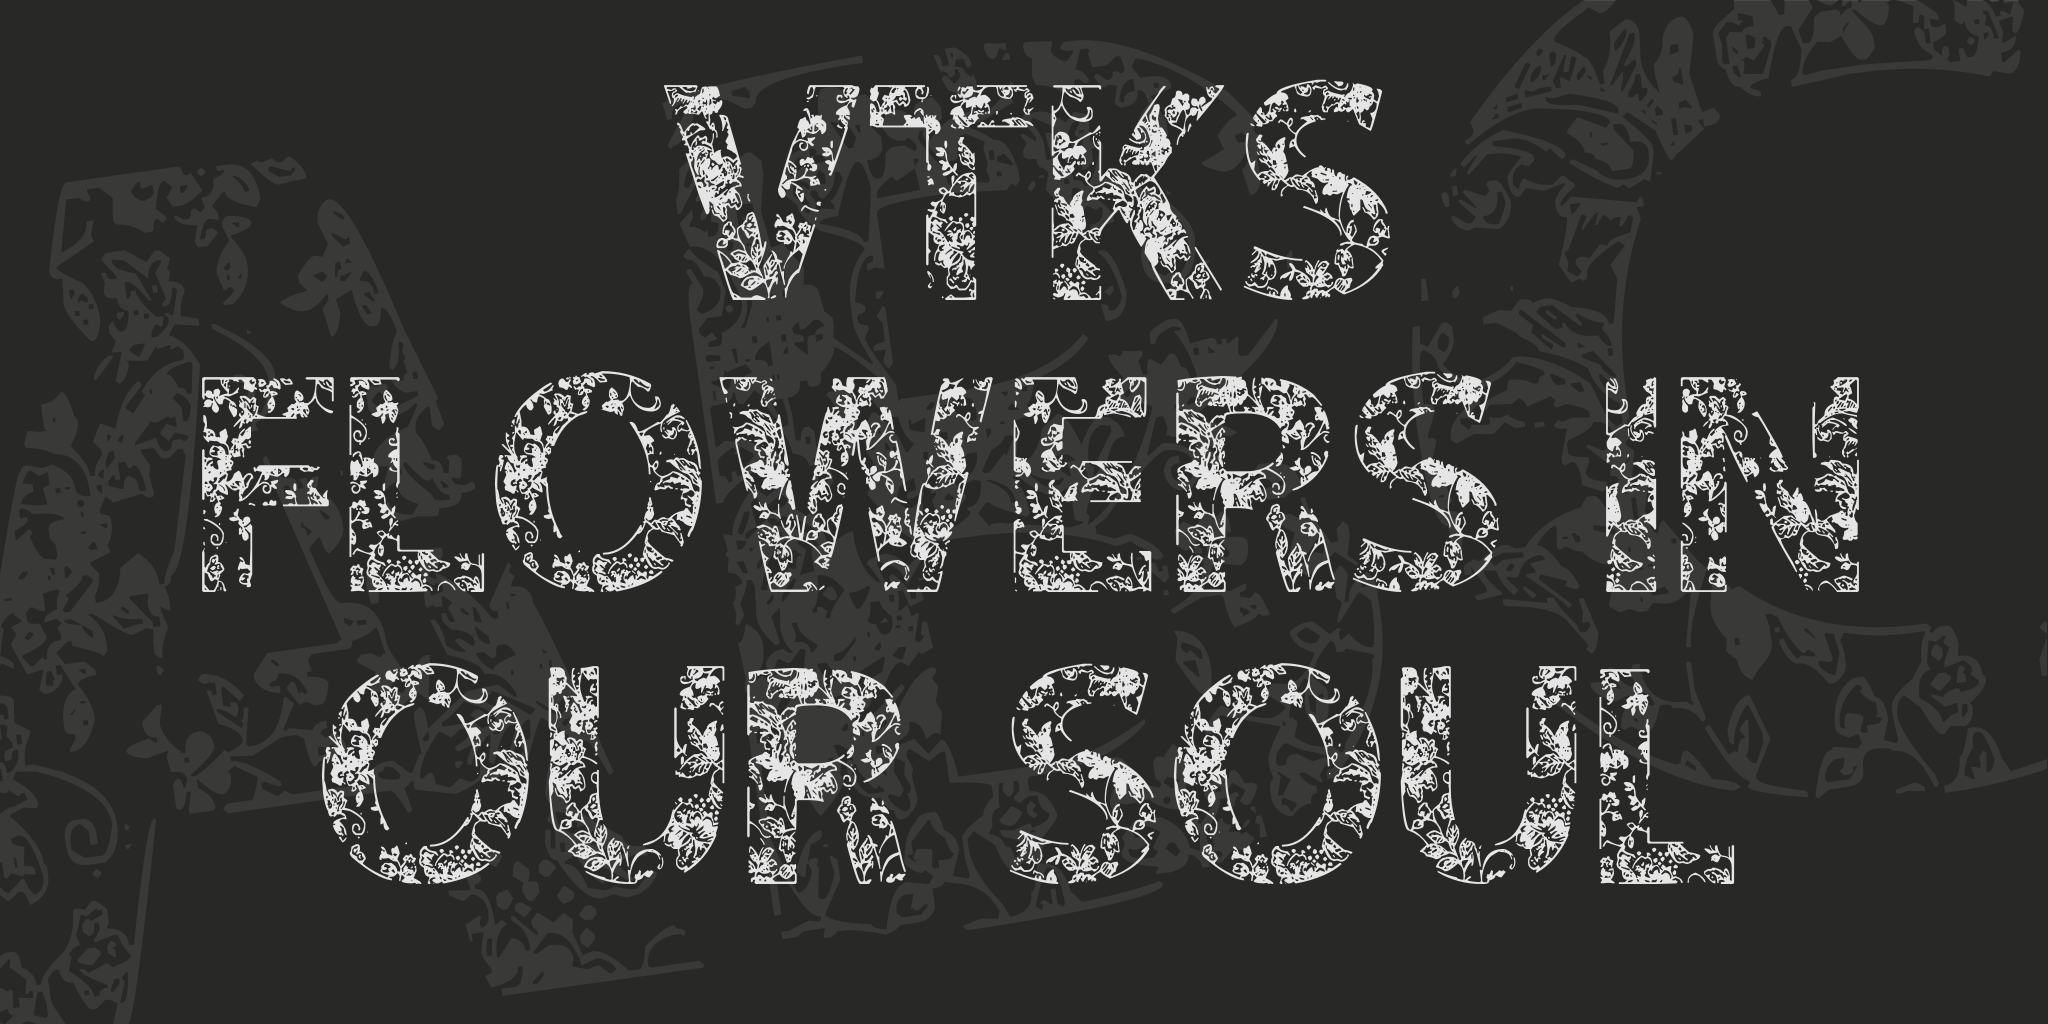 Vtks Flowers In Our Soul